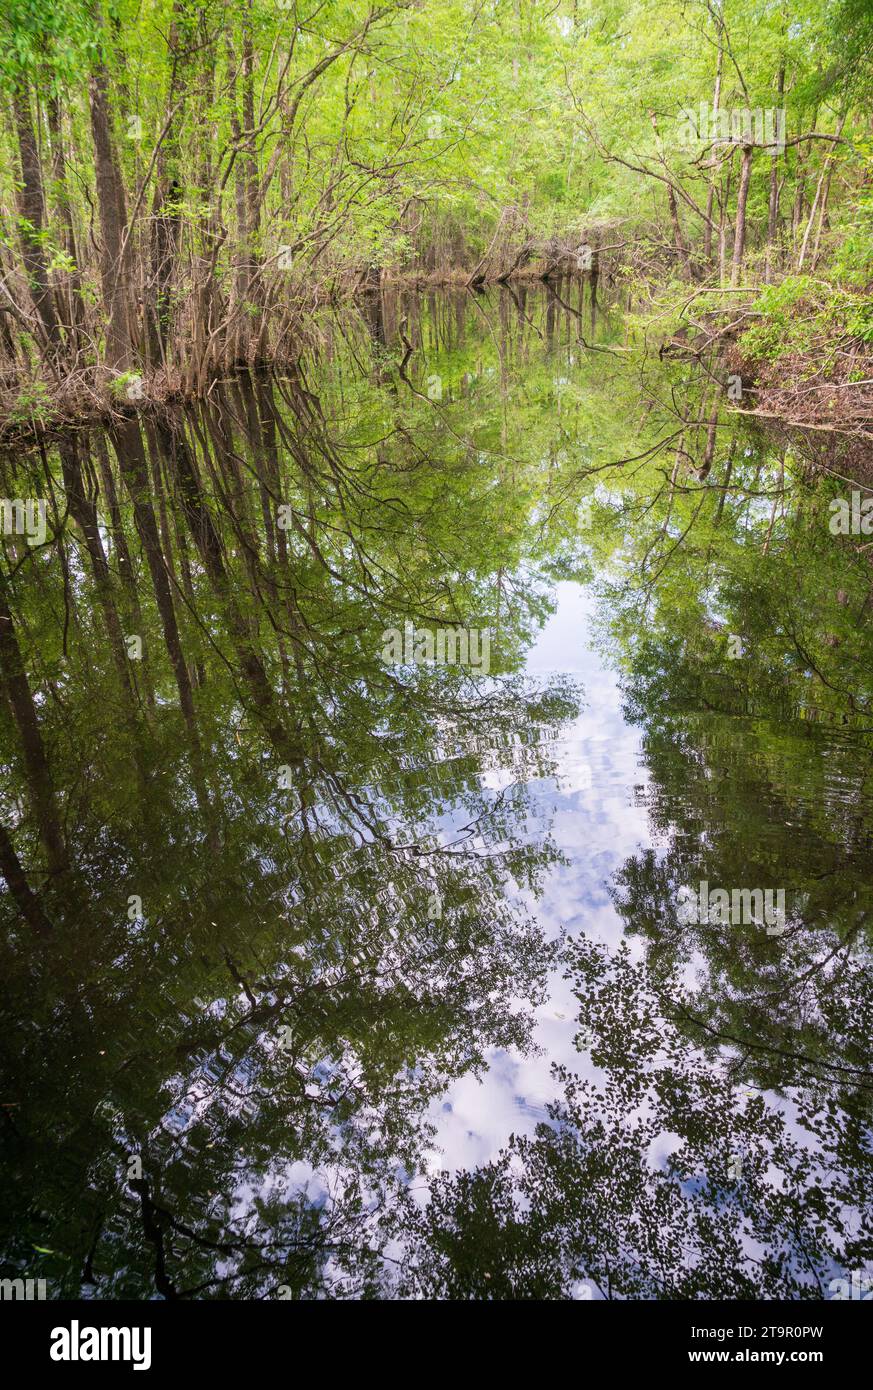 The Swampy Creek at Moores Creek National Battlefield, NPS Site Stock Photo